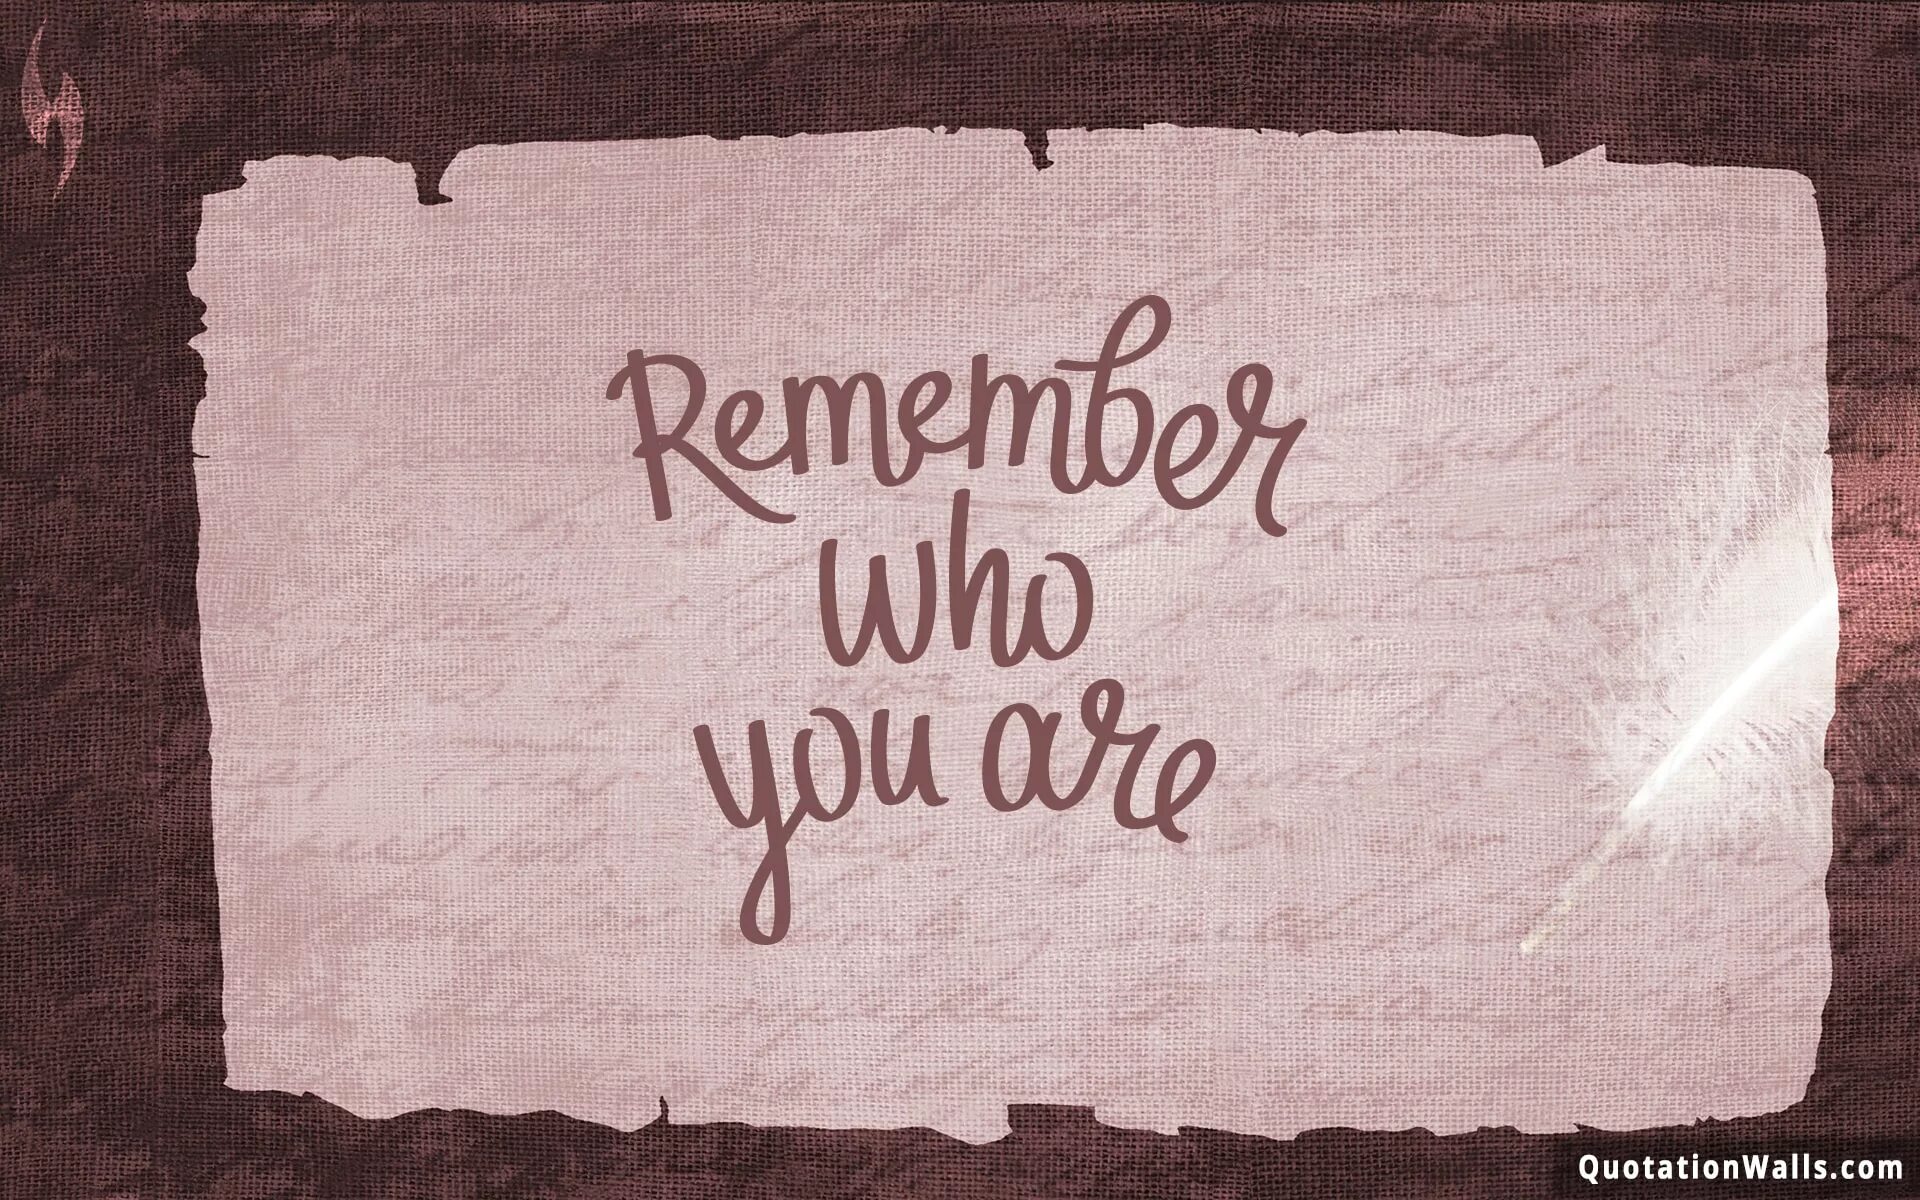 Remember who you are Wallpaper. Remember who you are обои. Ремембер ху ю а. Remember who you started. Remember you dominurmom